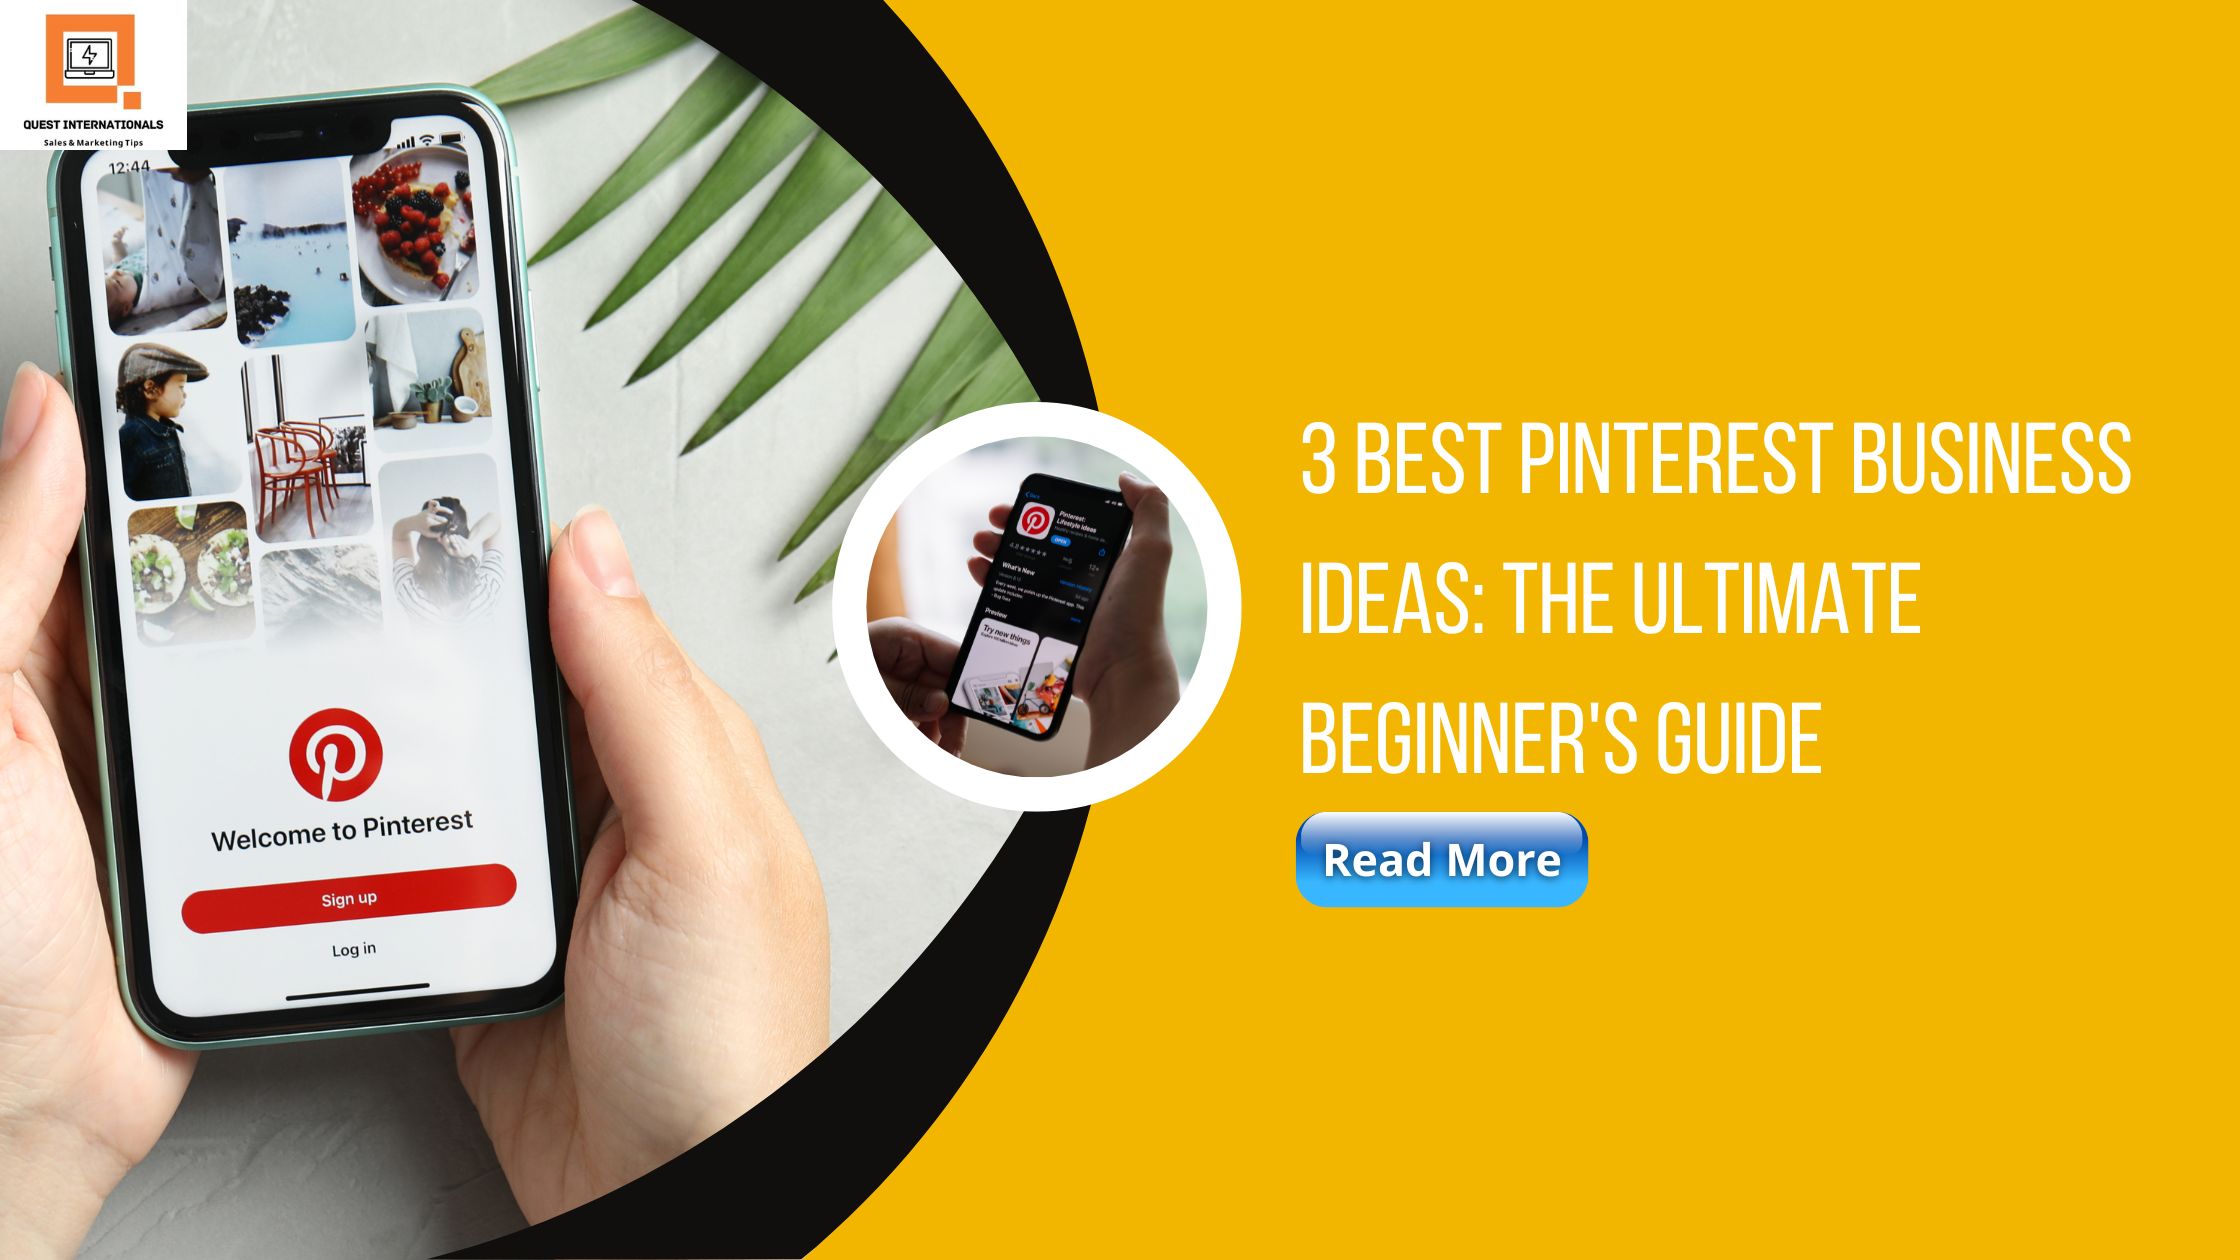 You are currently viewing 3 Best Pinterest Business Ideas: The Ultimate Beginner’s Guide